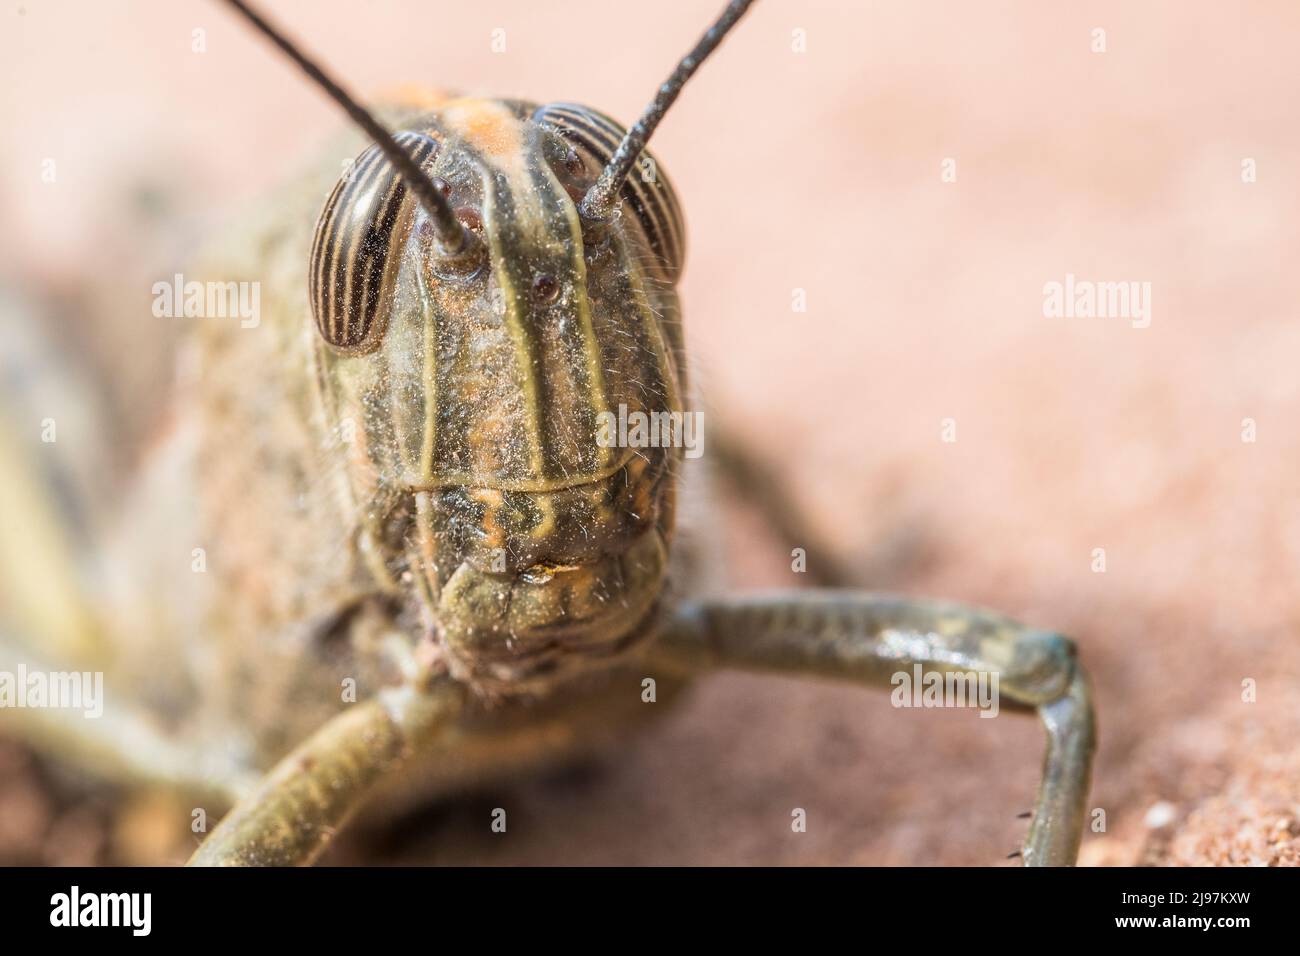 Anacridium aegyptium, the Egyptian grasshopper or Egyptian locust, is a species of insect belonging to the subfamily Cyrtacanthacridinae, female. Stock Photo